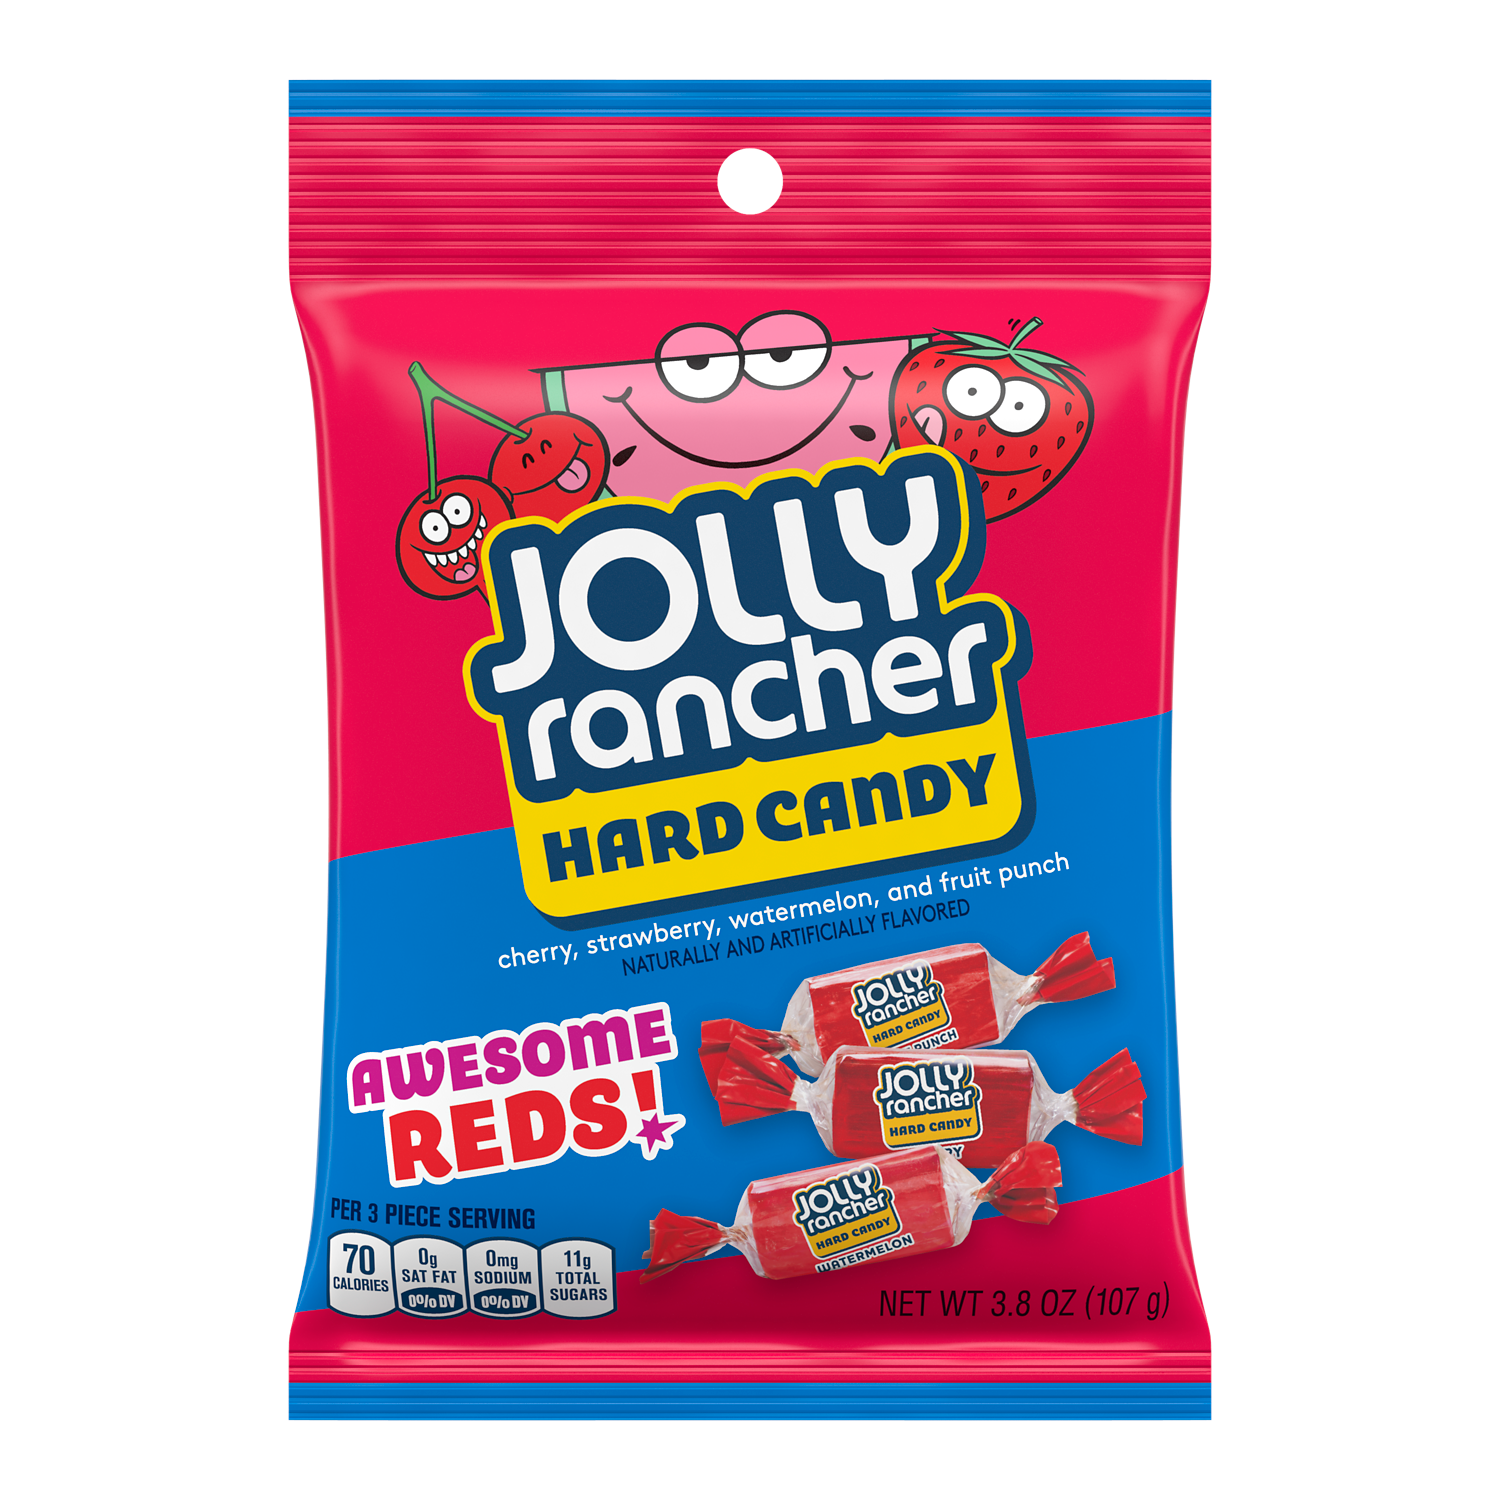 JOLLY RANCHER Awesome Reds Hard Candy, 3.8 oz bag - Front of Package